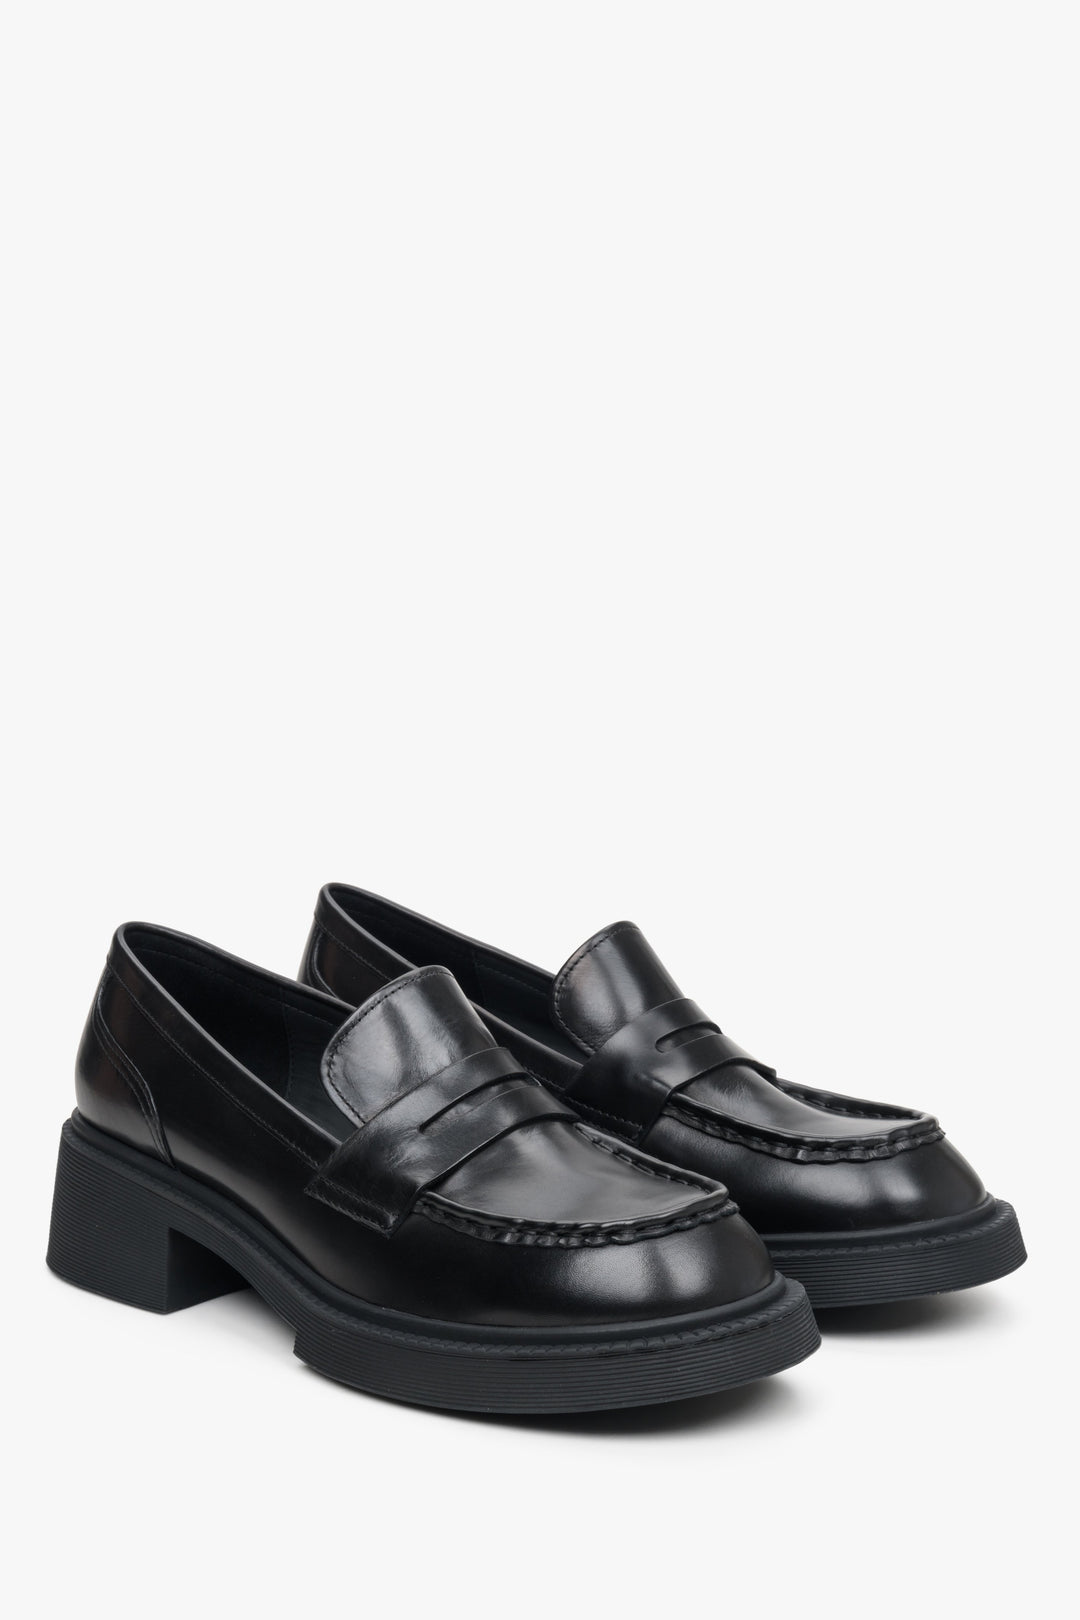 Women's black leather moccasins with a stable heel, Estro.